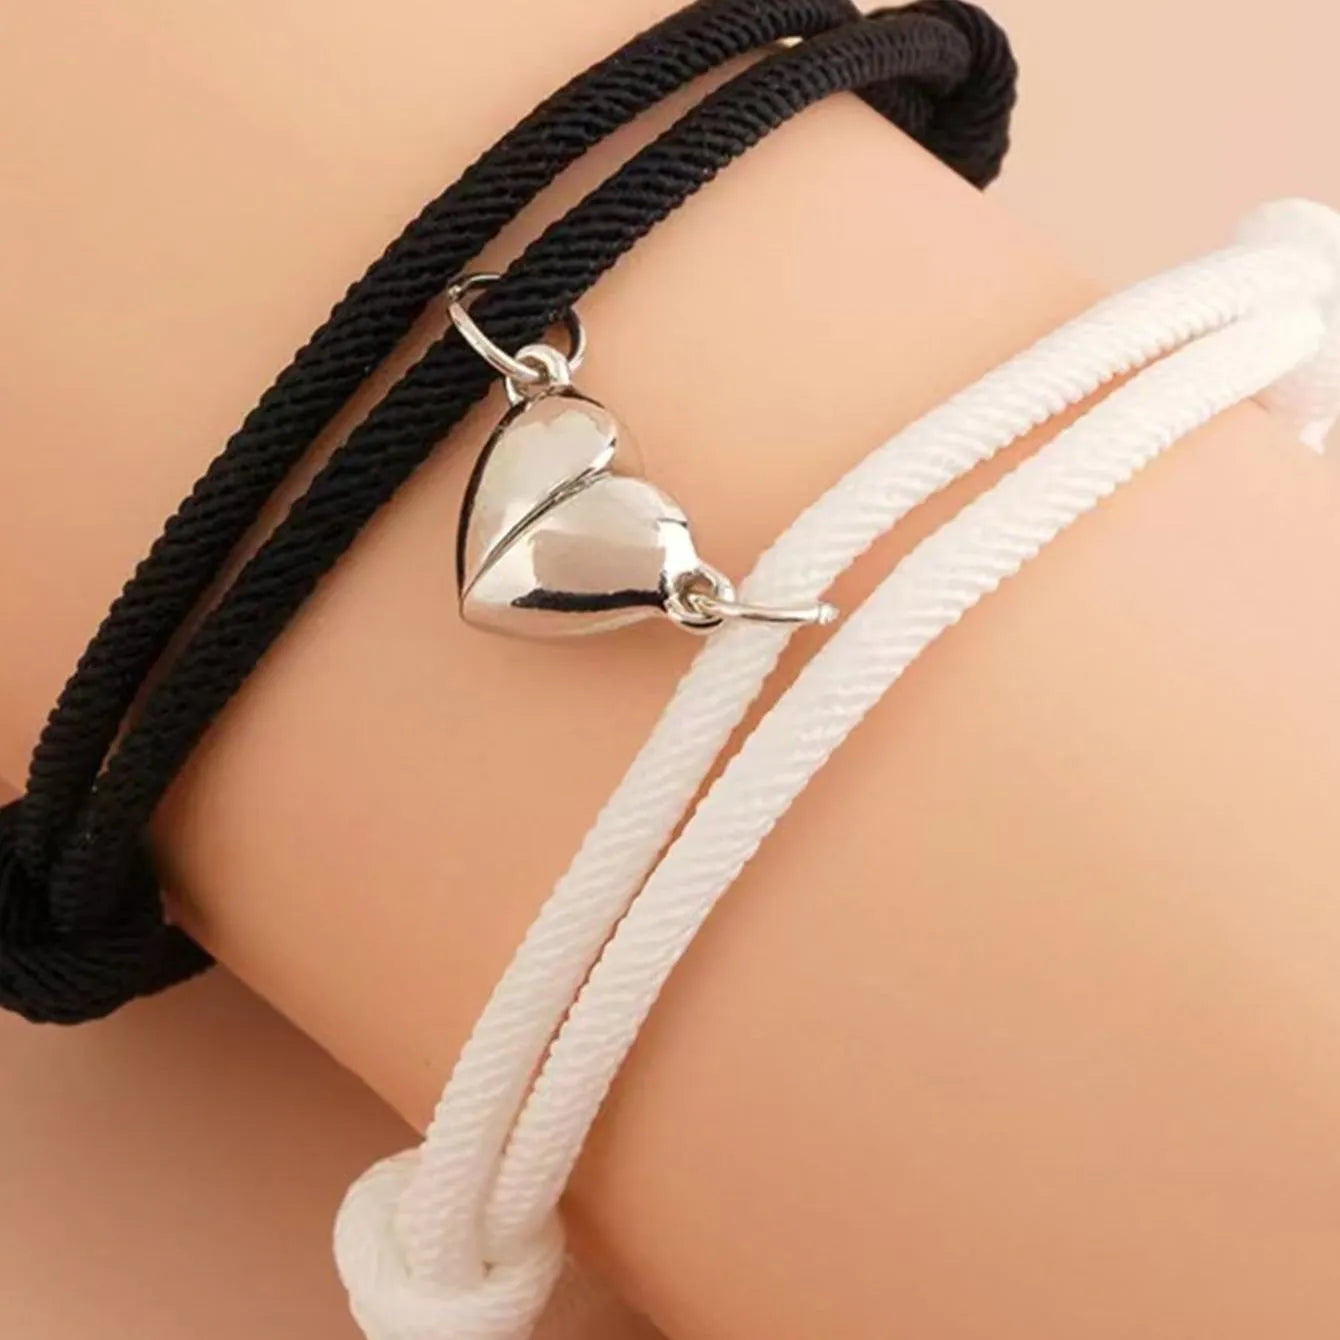 2 Piece Color Black White Hand Rope Love Magnetic Couple